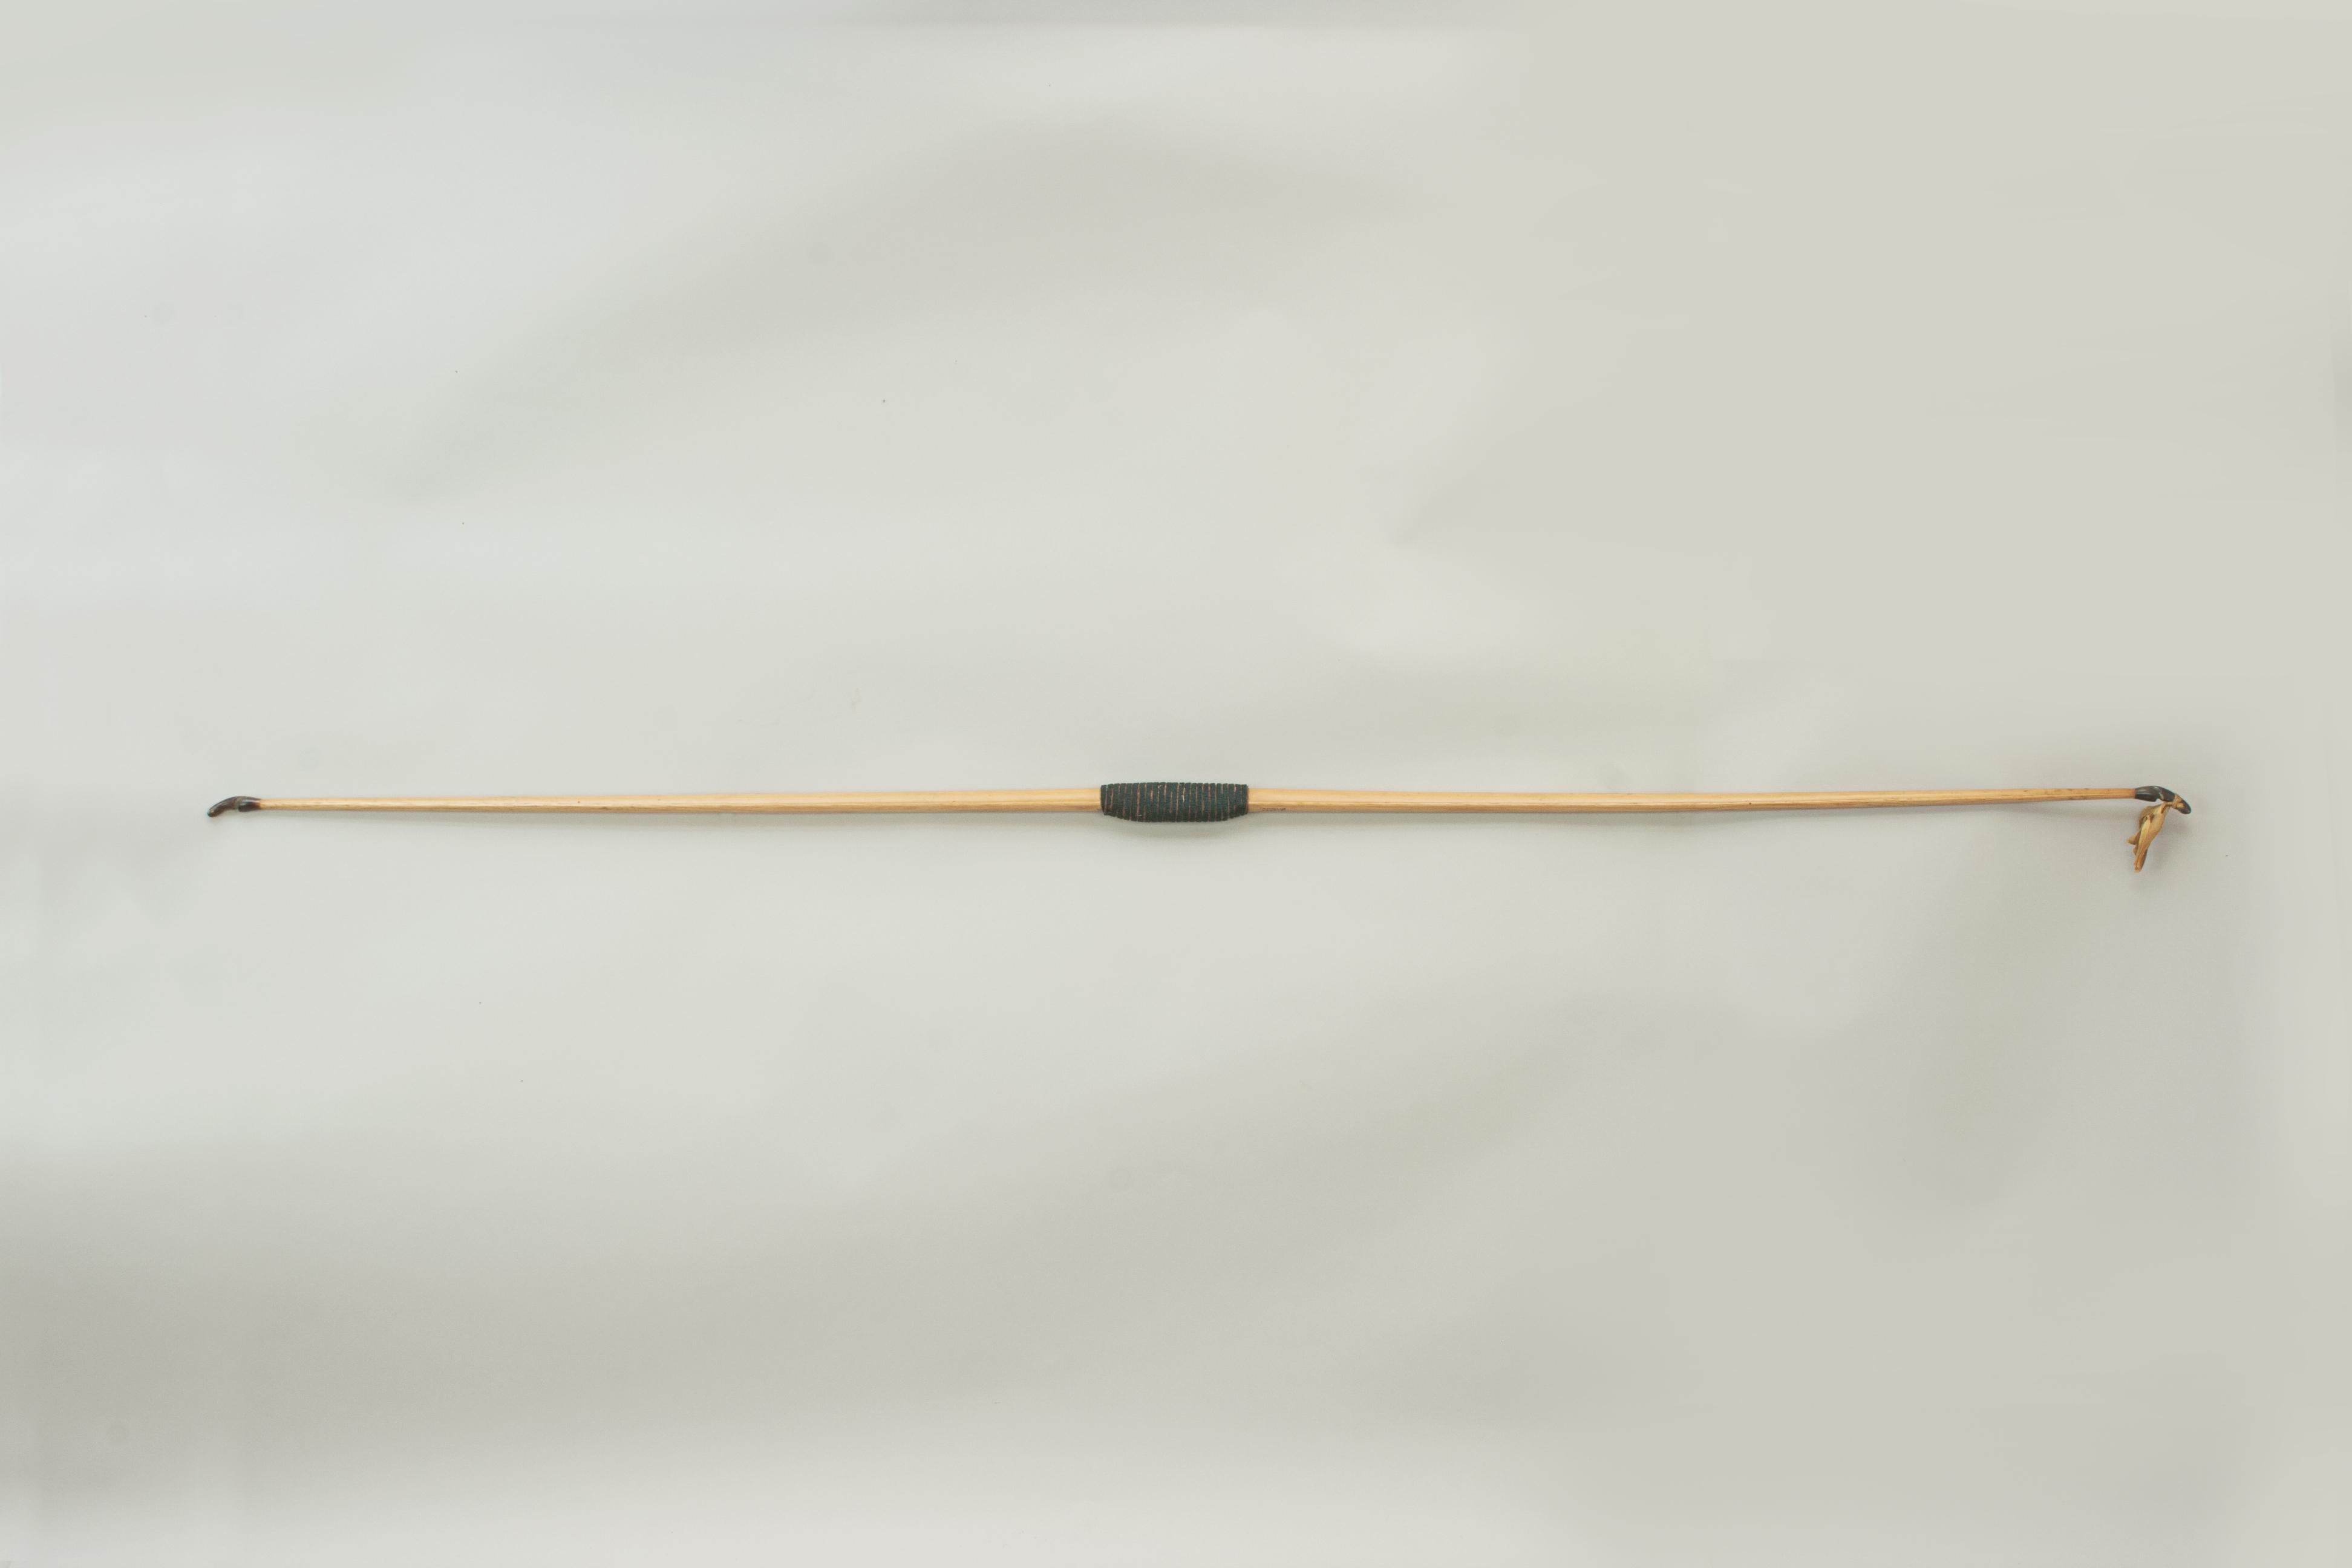 Vintage F.H. Ayres Longbow.
A very good laminated ladies archery bow produced by F.H. Ayres Ltd., London. The bow is fitted with two horn nocks and a green fabric handle. Just above the grip is the makers name 'F.H. Ayres Ltd., London' and below